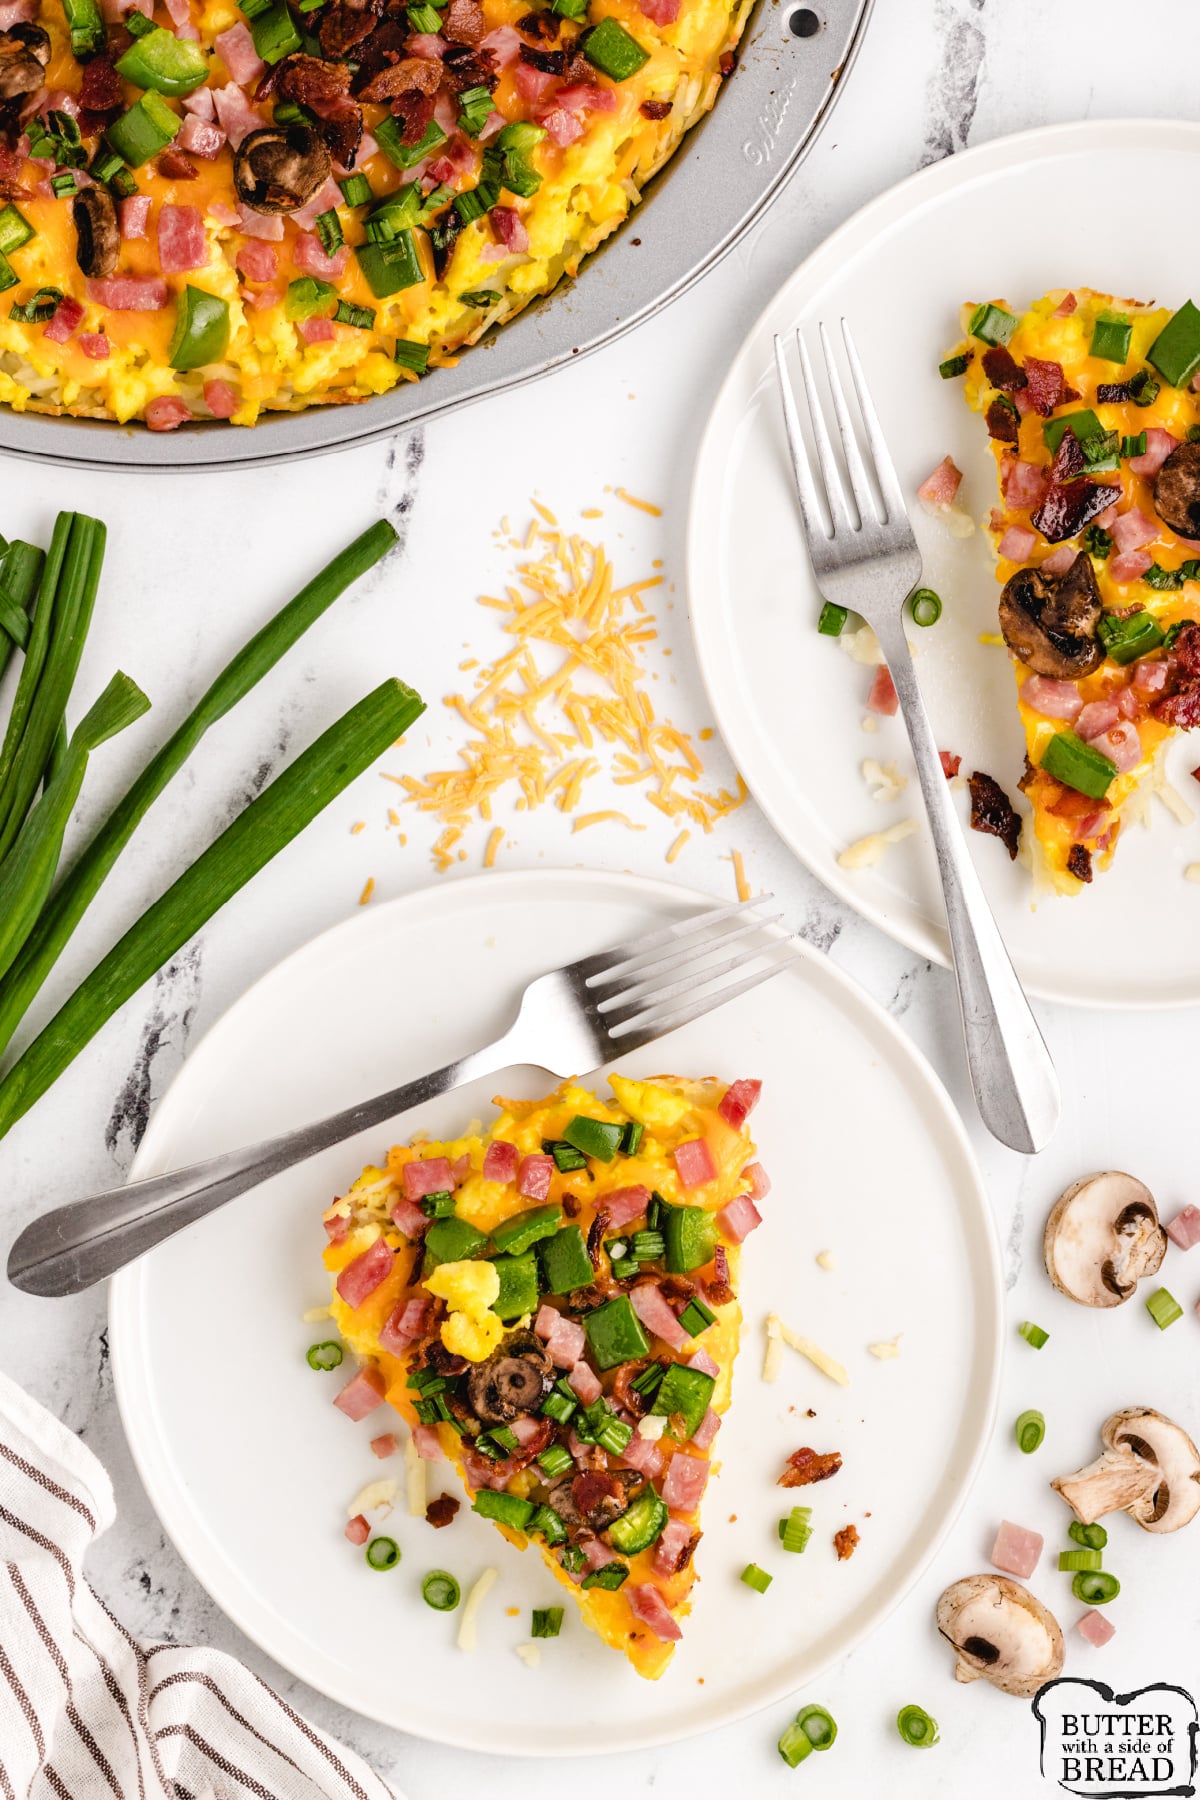 Hash Brown Breakfast Pizza made with a hash brown crust, scrambled eggs, diced ham, cheese and any other toppings you'd like! Delicious breakfast pizza recipe you can serve for breakfast, lunch or dinner!